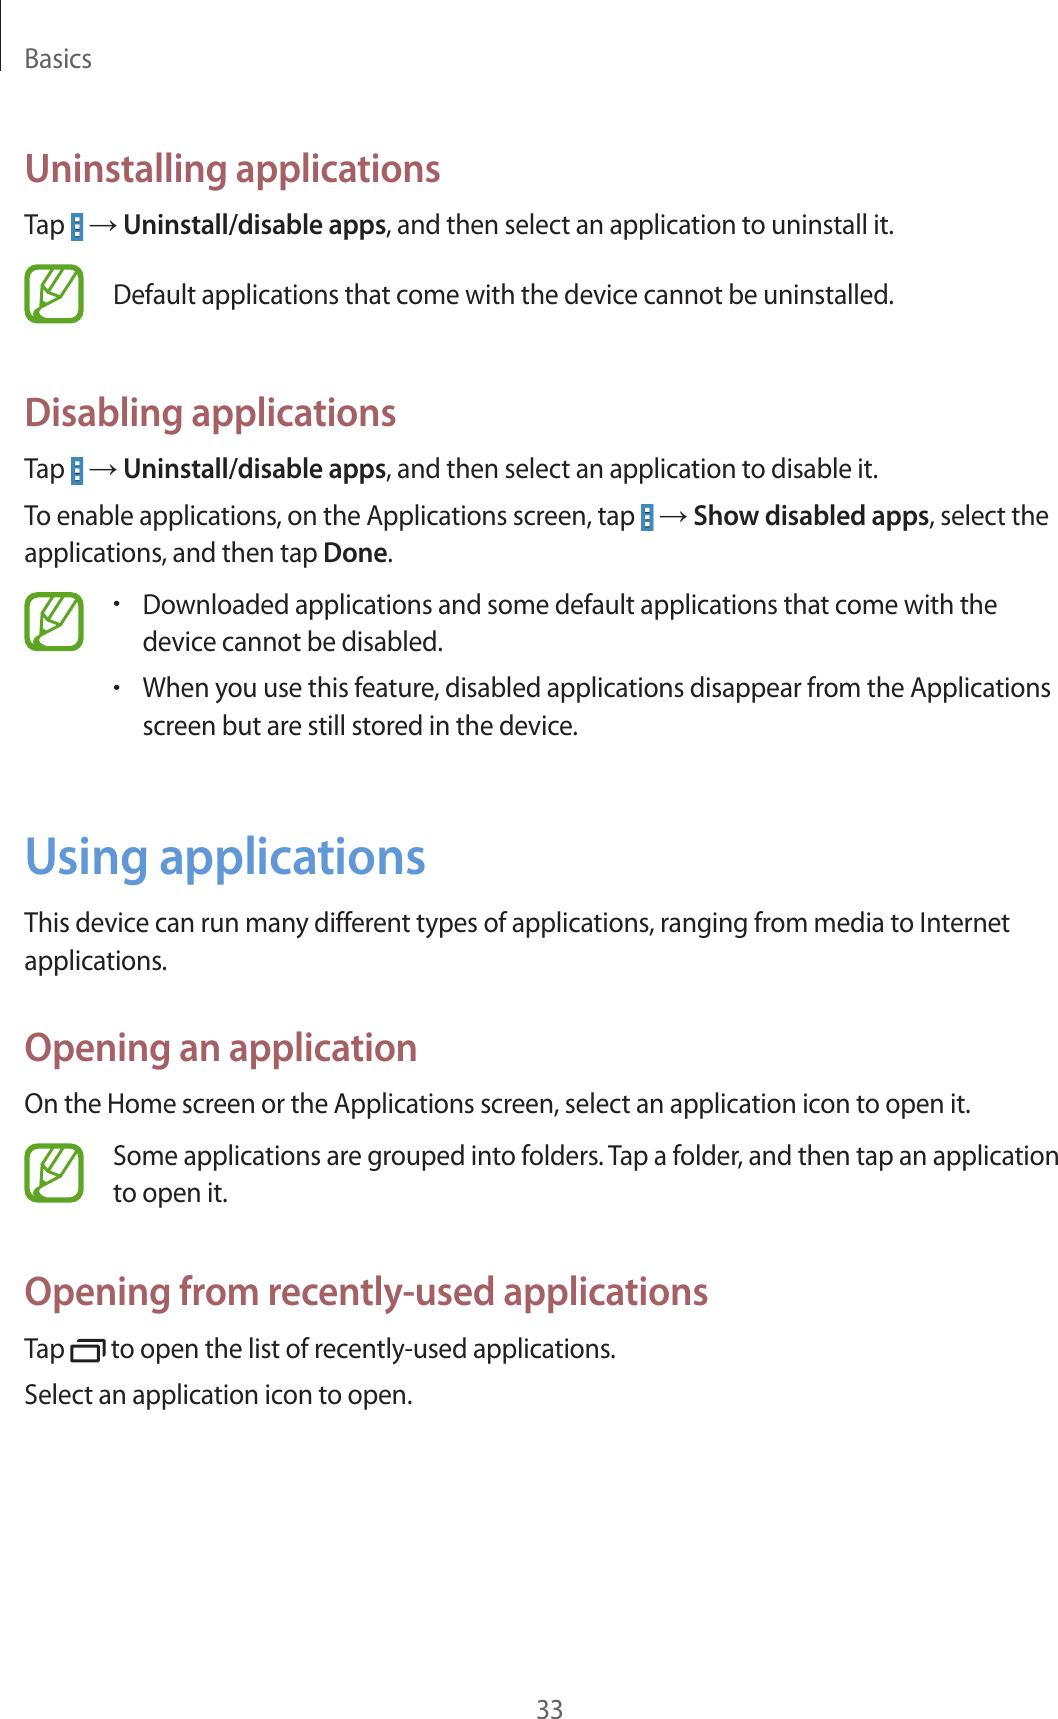 Basics33Uninstalling applicationsTap   → Uninstall/disable apps, and then select an application to uninstall it.Default applications that come with the device cannot be uninstalled.Disabling applicationsTap   → Uninstall/disable apps, and then select an application to disable it.To enable applications, on the Applications screen, tap   → Show disabled apps, select the applications, and then tap Done.•Downloaded applications and some default applications that come with the device cannot be disabled.•When you use this feature, disabled applications disappear from the Applications screen but are still stored in the device.Using applicationsThis device can run many different types of applications, ranging from media to Internet applications.Opening an applicationOn the Home screen or the Applications screen, select an application icon to open it.Some applications are grouped into folders. Tap a folder, and then tap an application to open it.Opening from recently-used applicationsTap   to open the list of recently-used applications.Select an application icon to open.